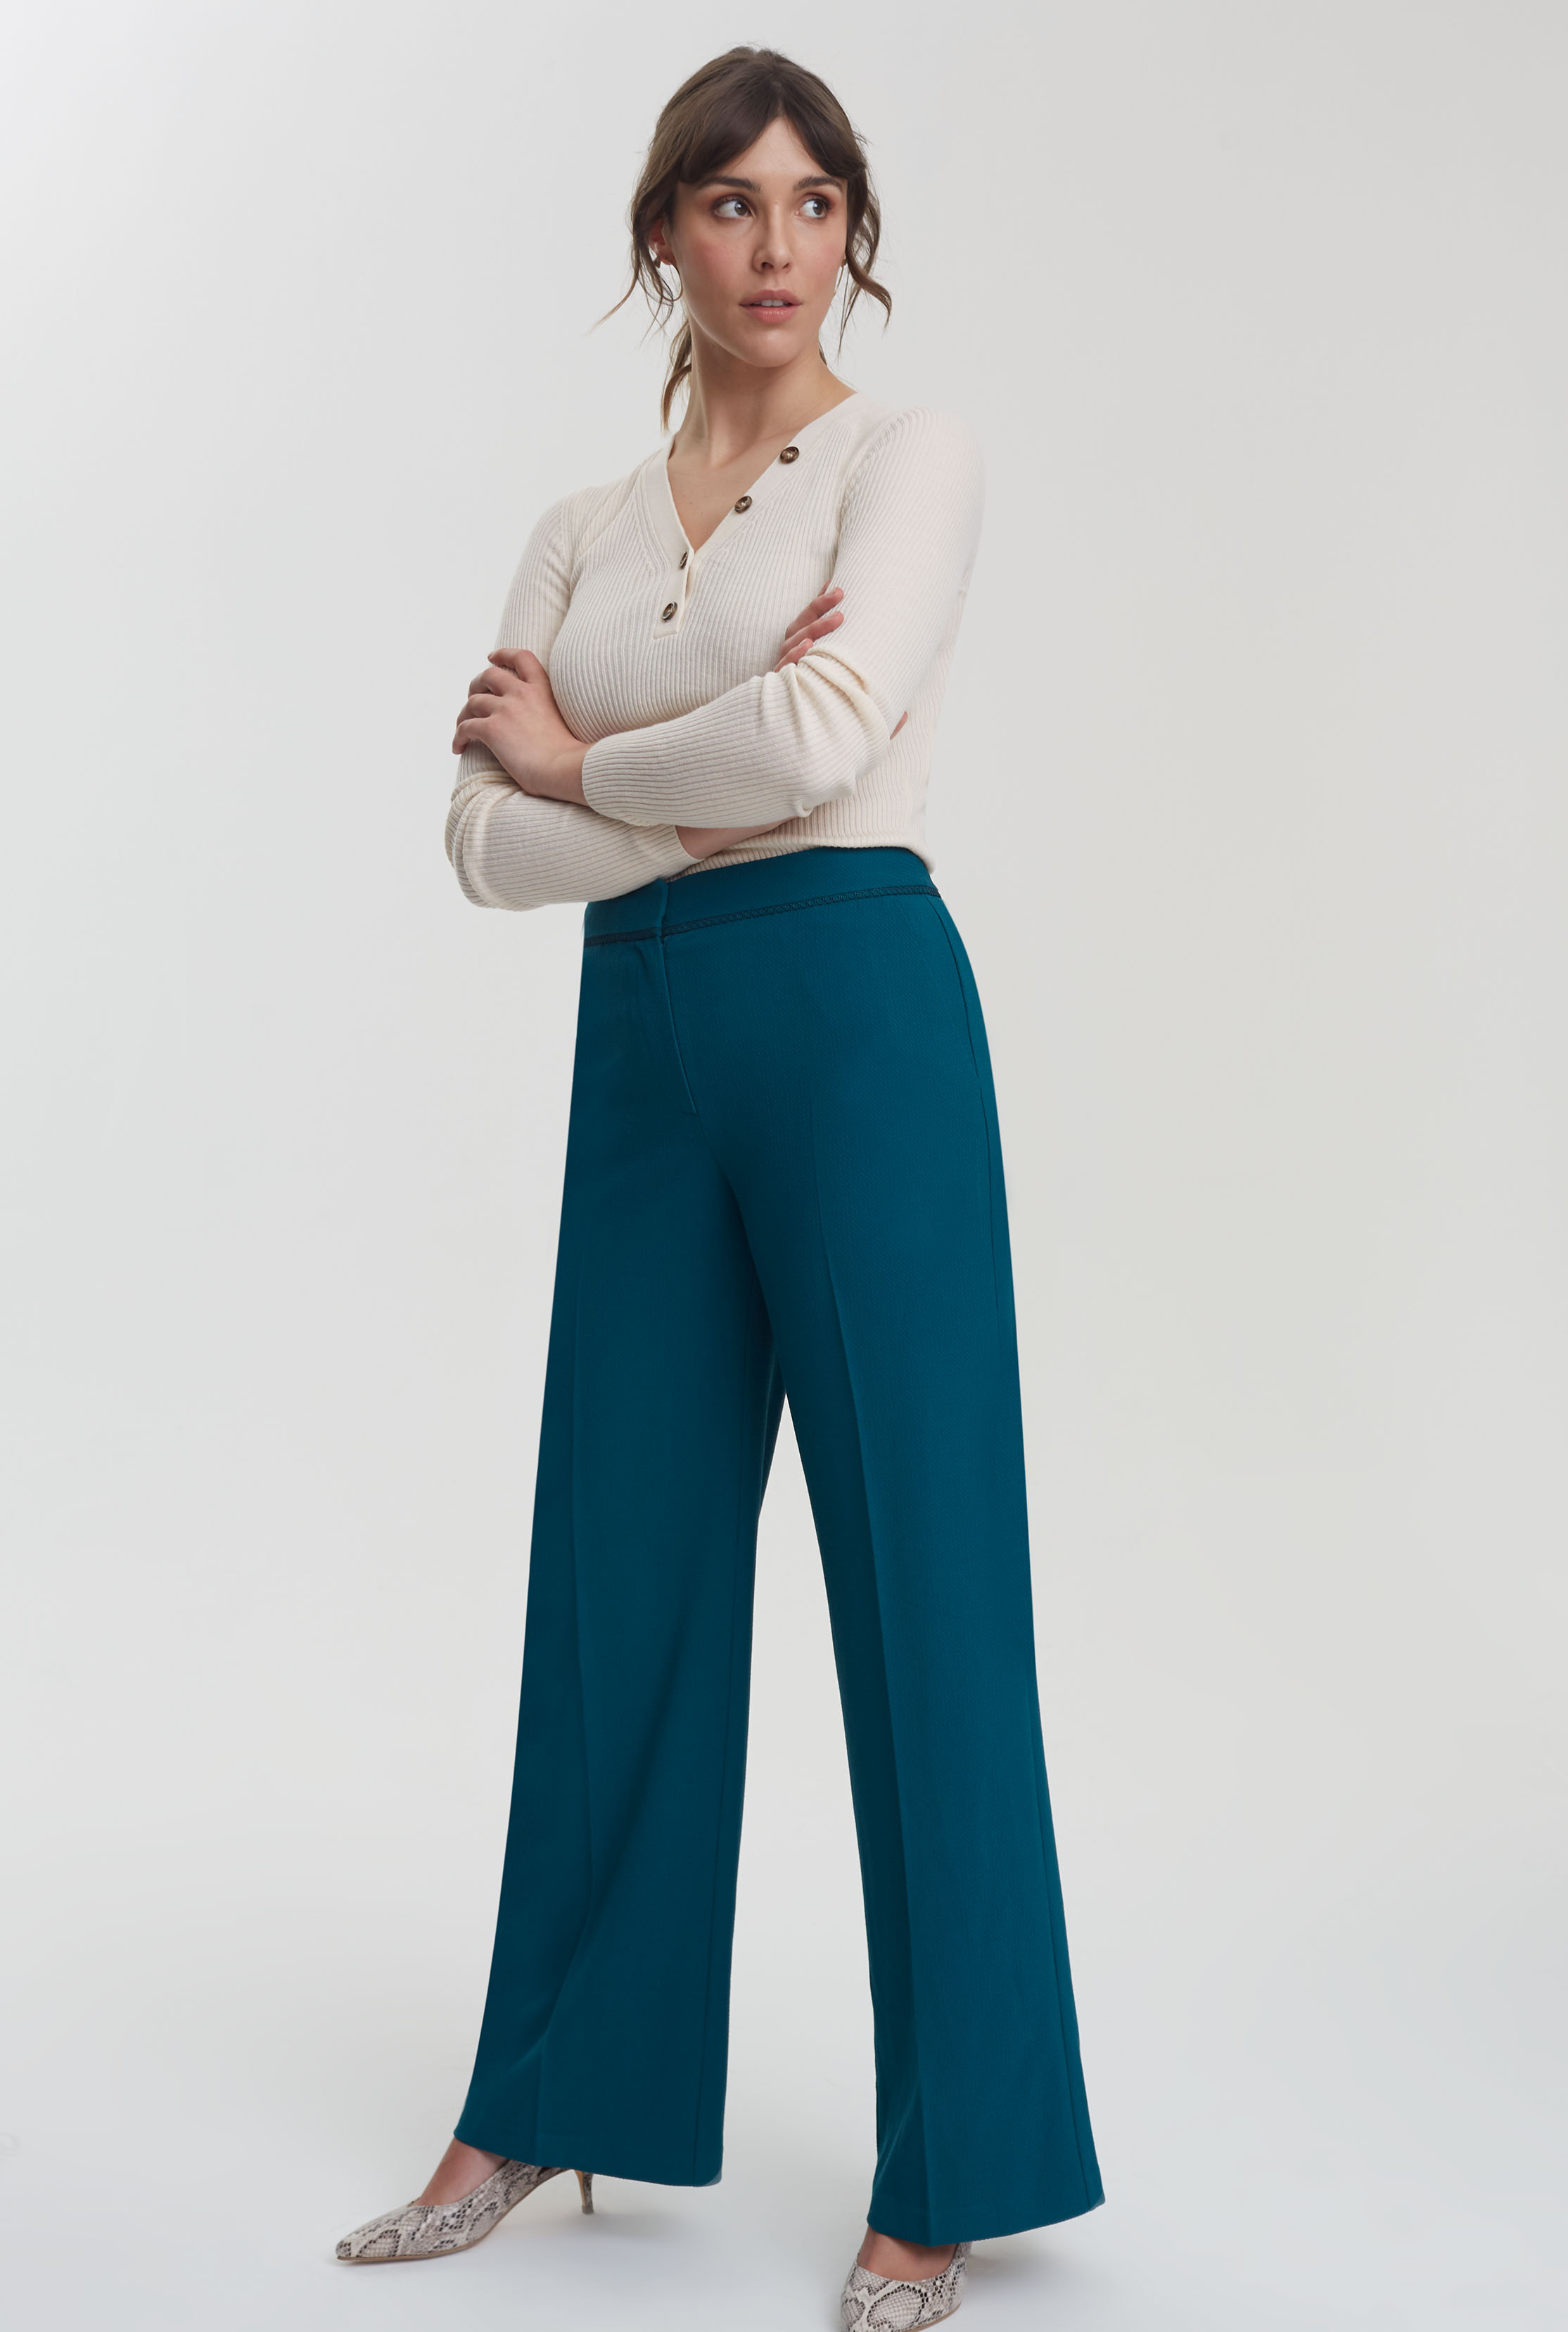 Teal Blue Trim Textured Wide Leg Suit Pant | Long Tall Sally